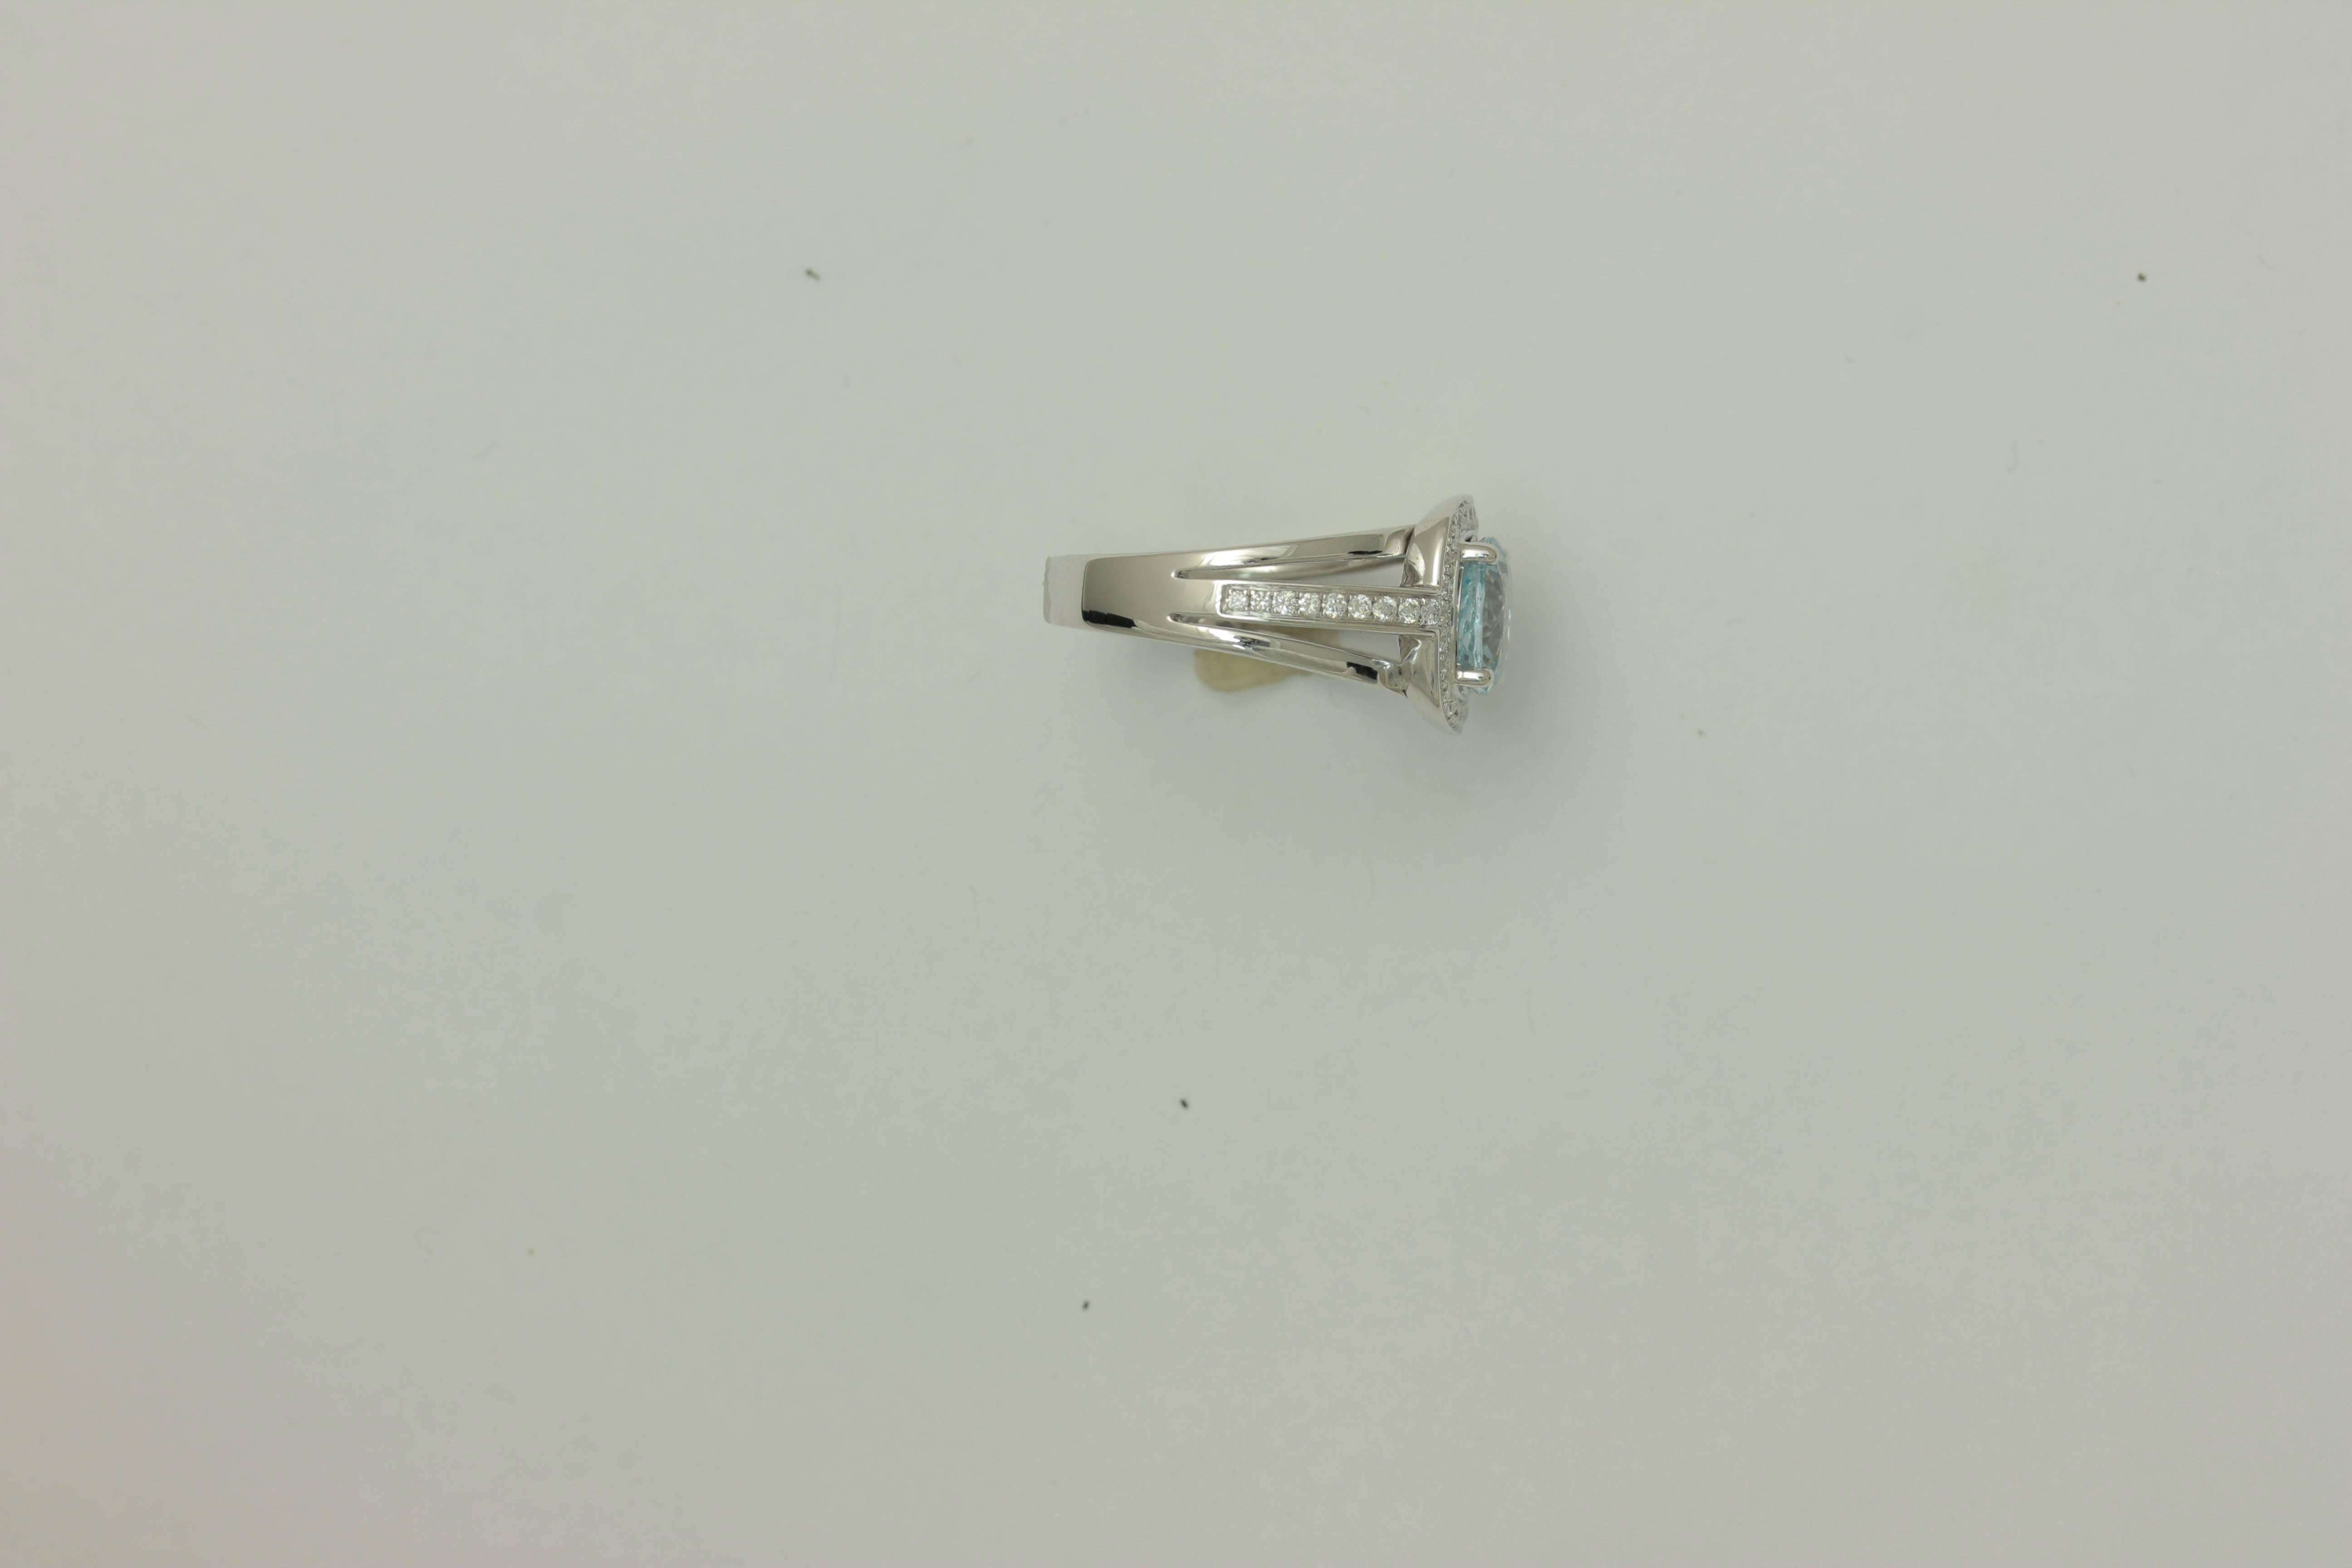 14K White Gold Aquamarine One-of-a-Kind CocktailRing.
Total Aquamarine weight is approximately 1.78ct, 
Total diamond weight is approximately 0.32ct